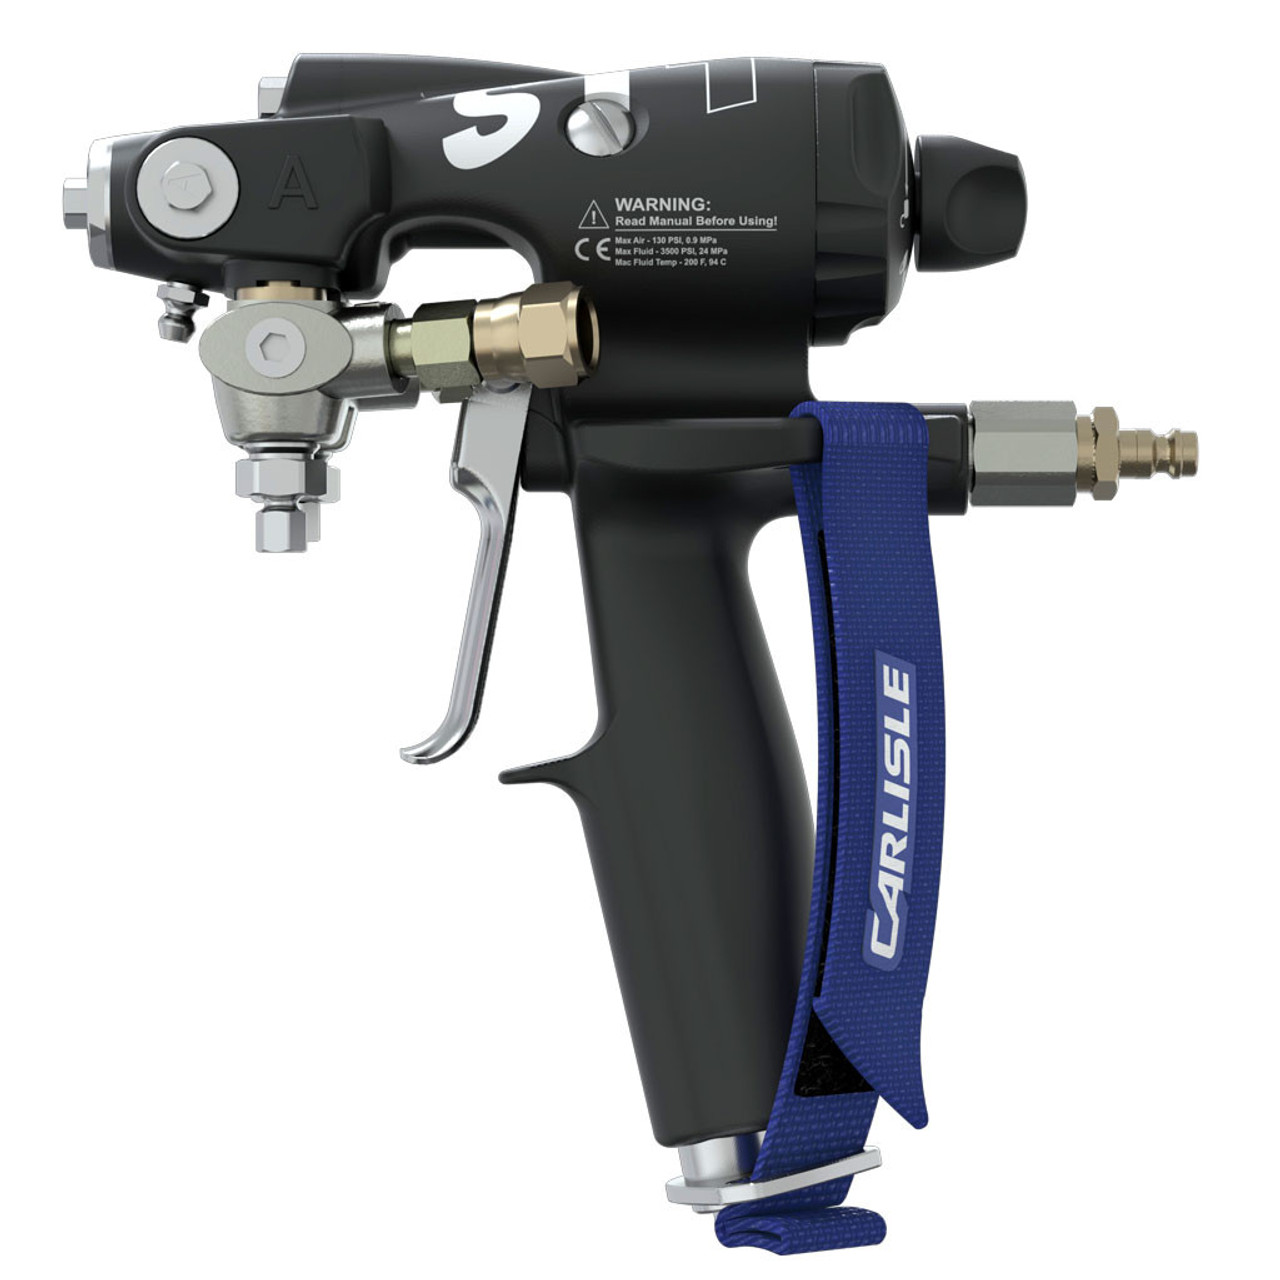 Graco Paint Sprayers & Accessories for sale